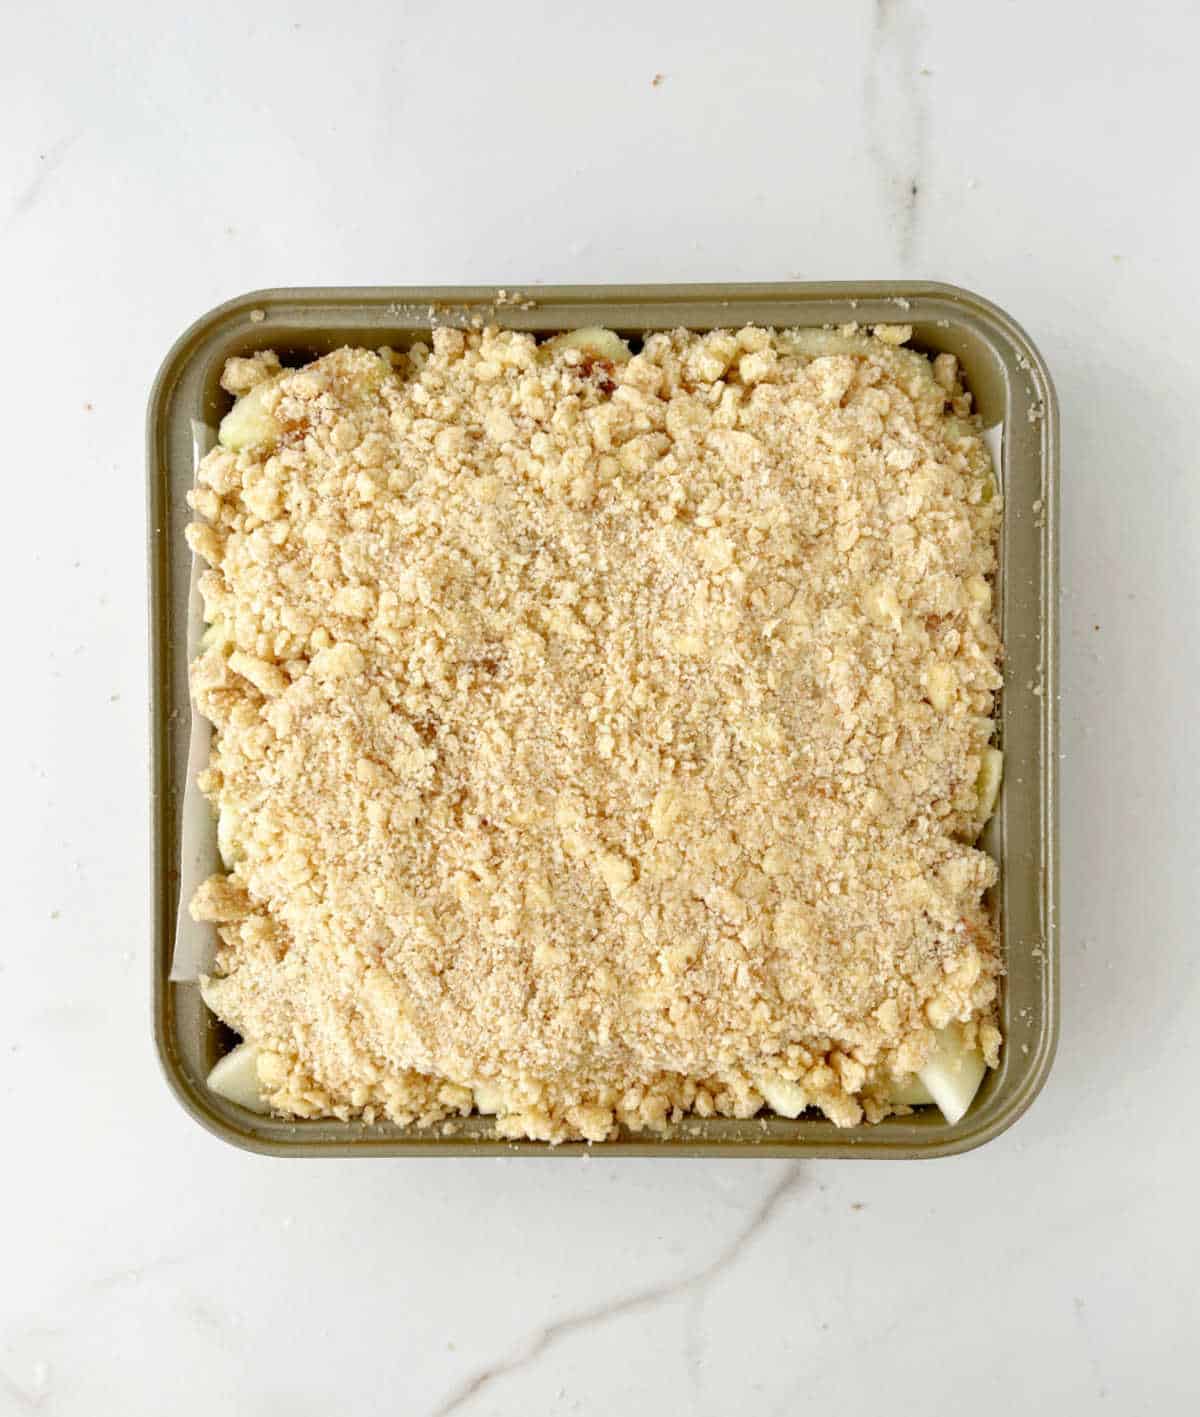 Crumble topping covering apples in a square baking pan on a white marble surface.